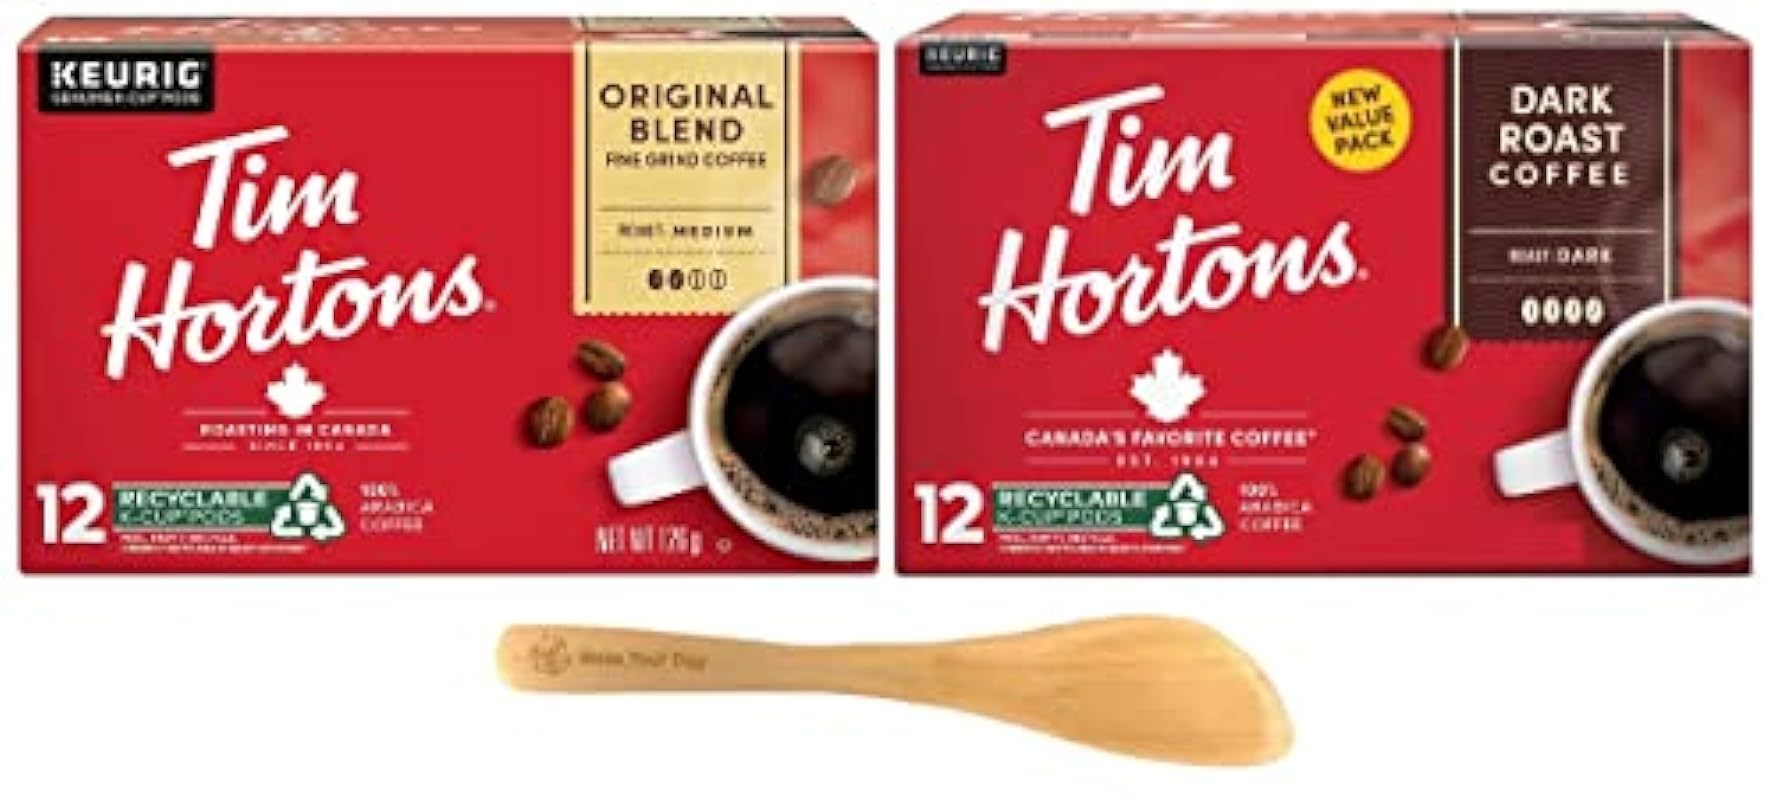 Tim Hortons Coffee K-Cups, Original Blend and Dark Roast, One 12ct Box of Each (24 K-Cups Total) - with MYD Drink Stirrer 549805322